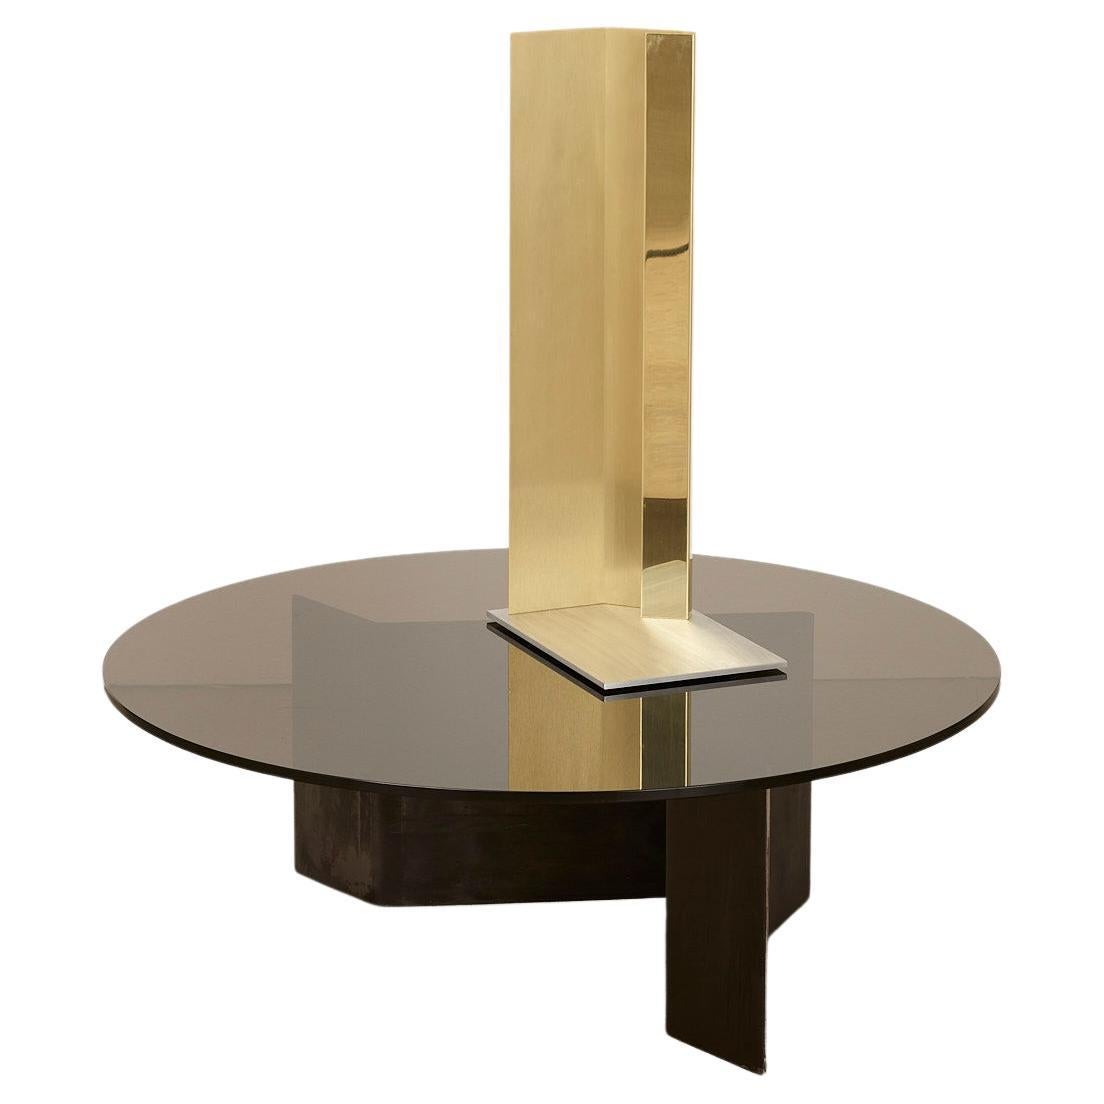 Mano standing lamp table by Umberto Bellardi Ricci
Dimensions: W15.2 x D27.9 x H31.7 cm
Materials: brasse, aluminium base, led strip.

All our lamps can be wired according to each country. If sold to the USA it will be wired for the USA for